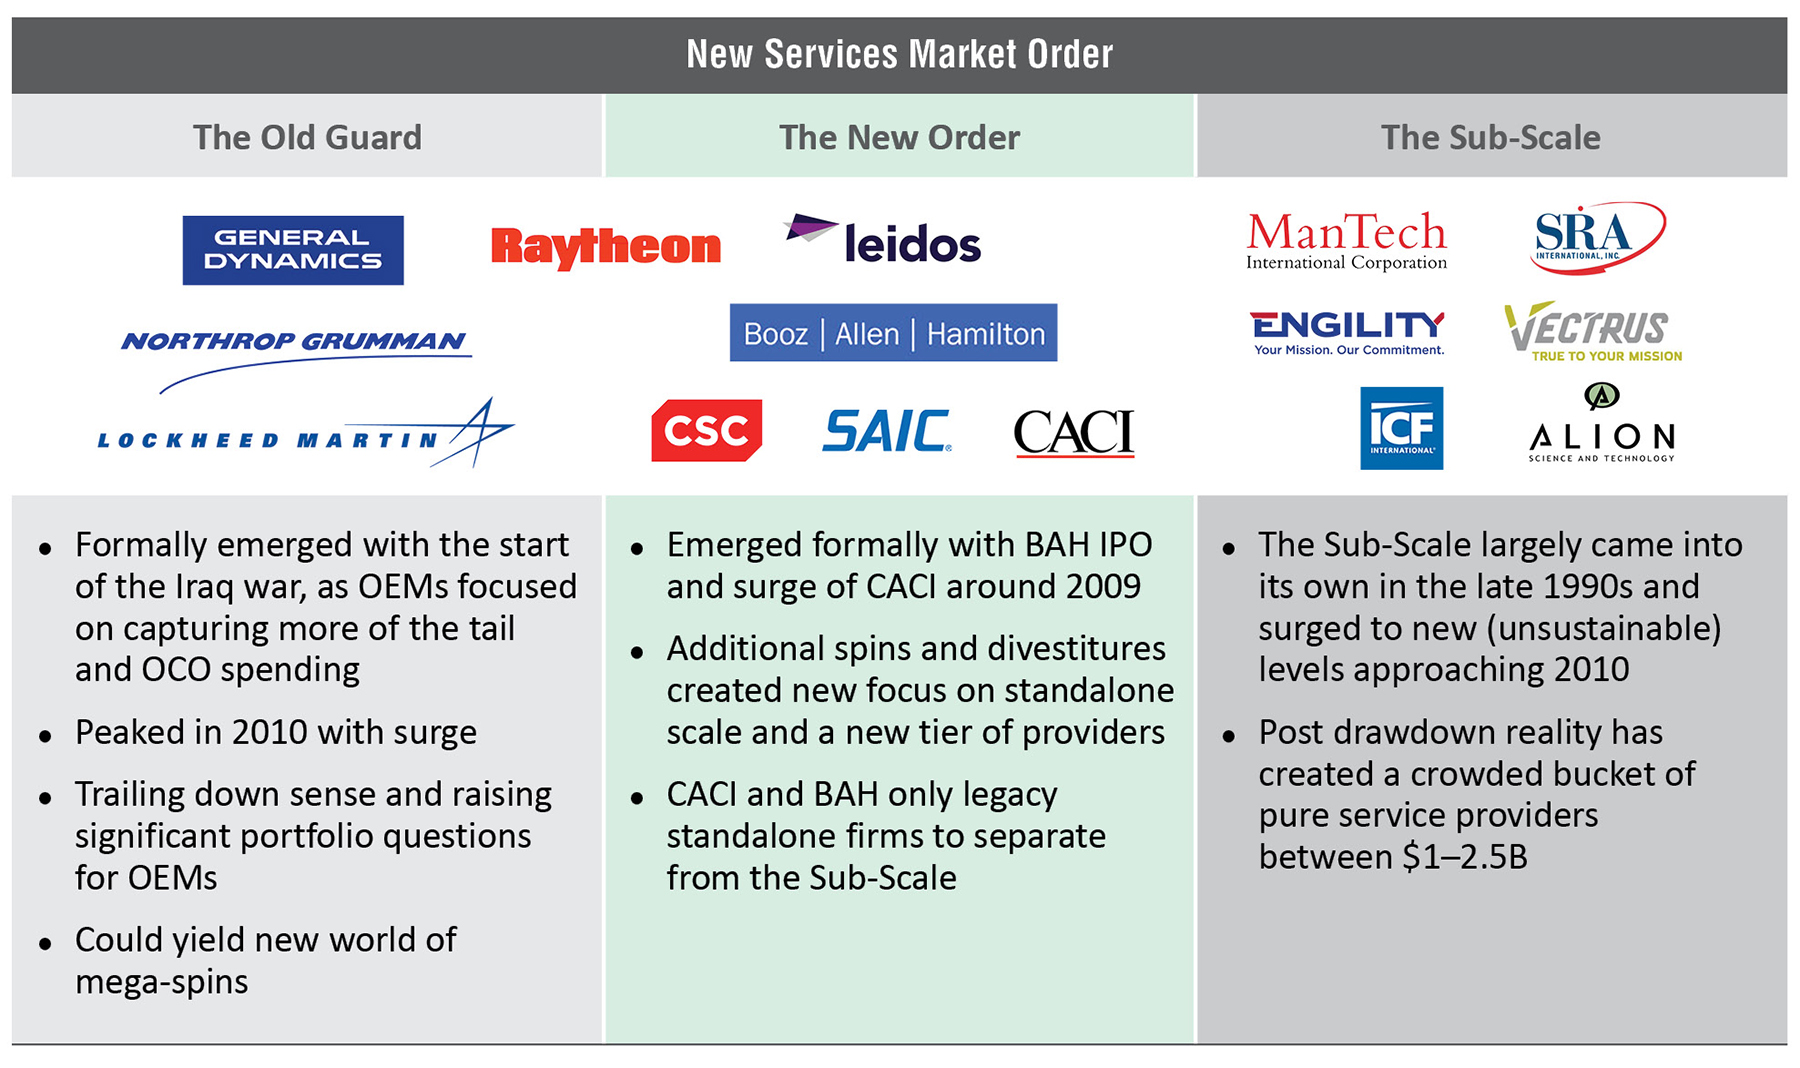 New Services Market Order - Table